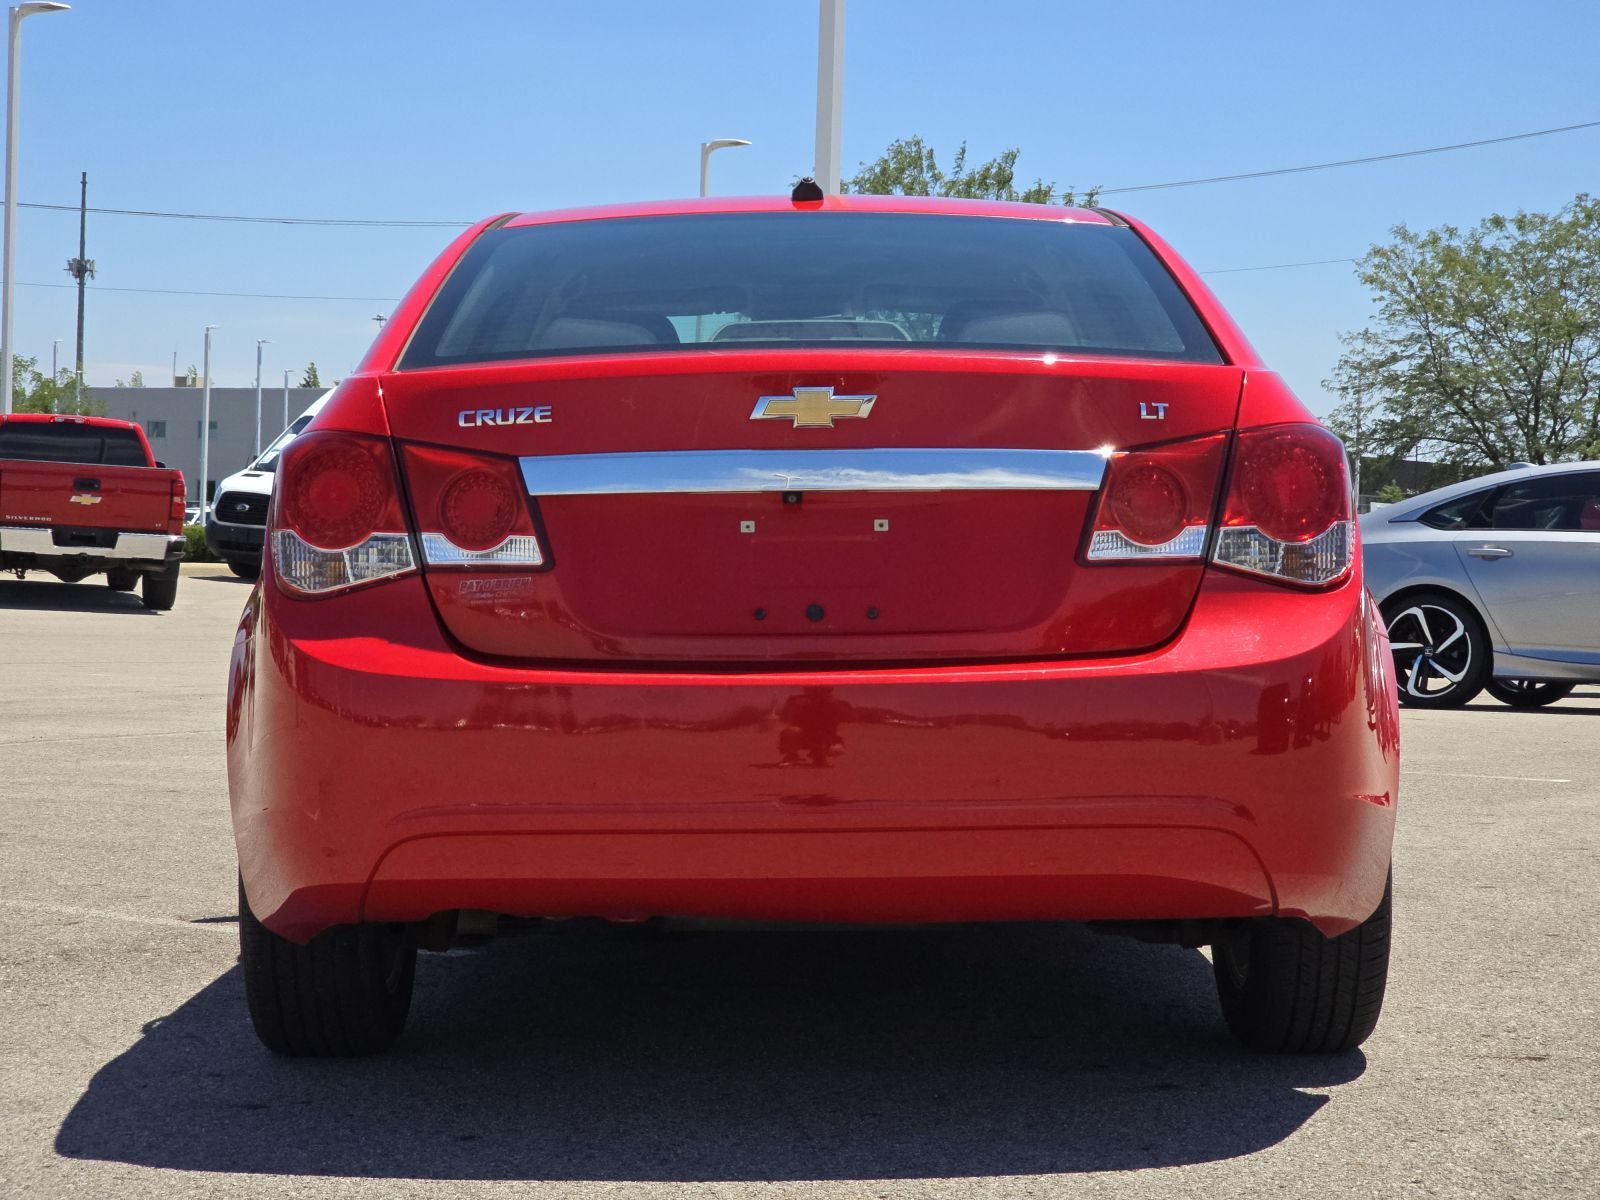 Used, 2014 Chevrolet Cruze 1LT, Red, P0637-13